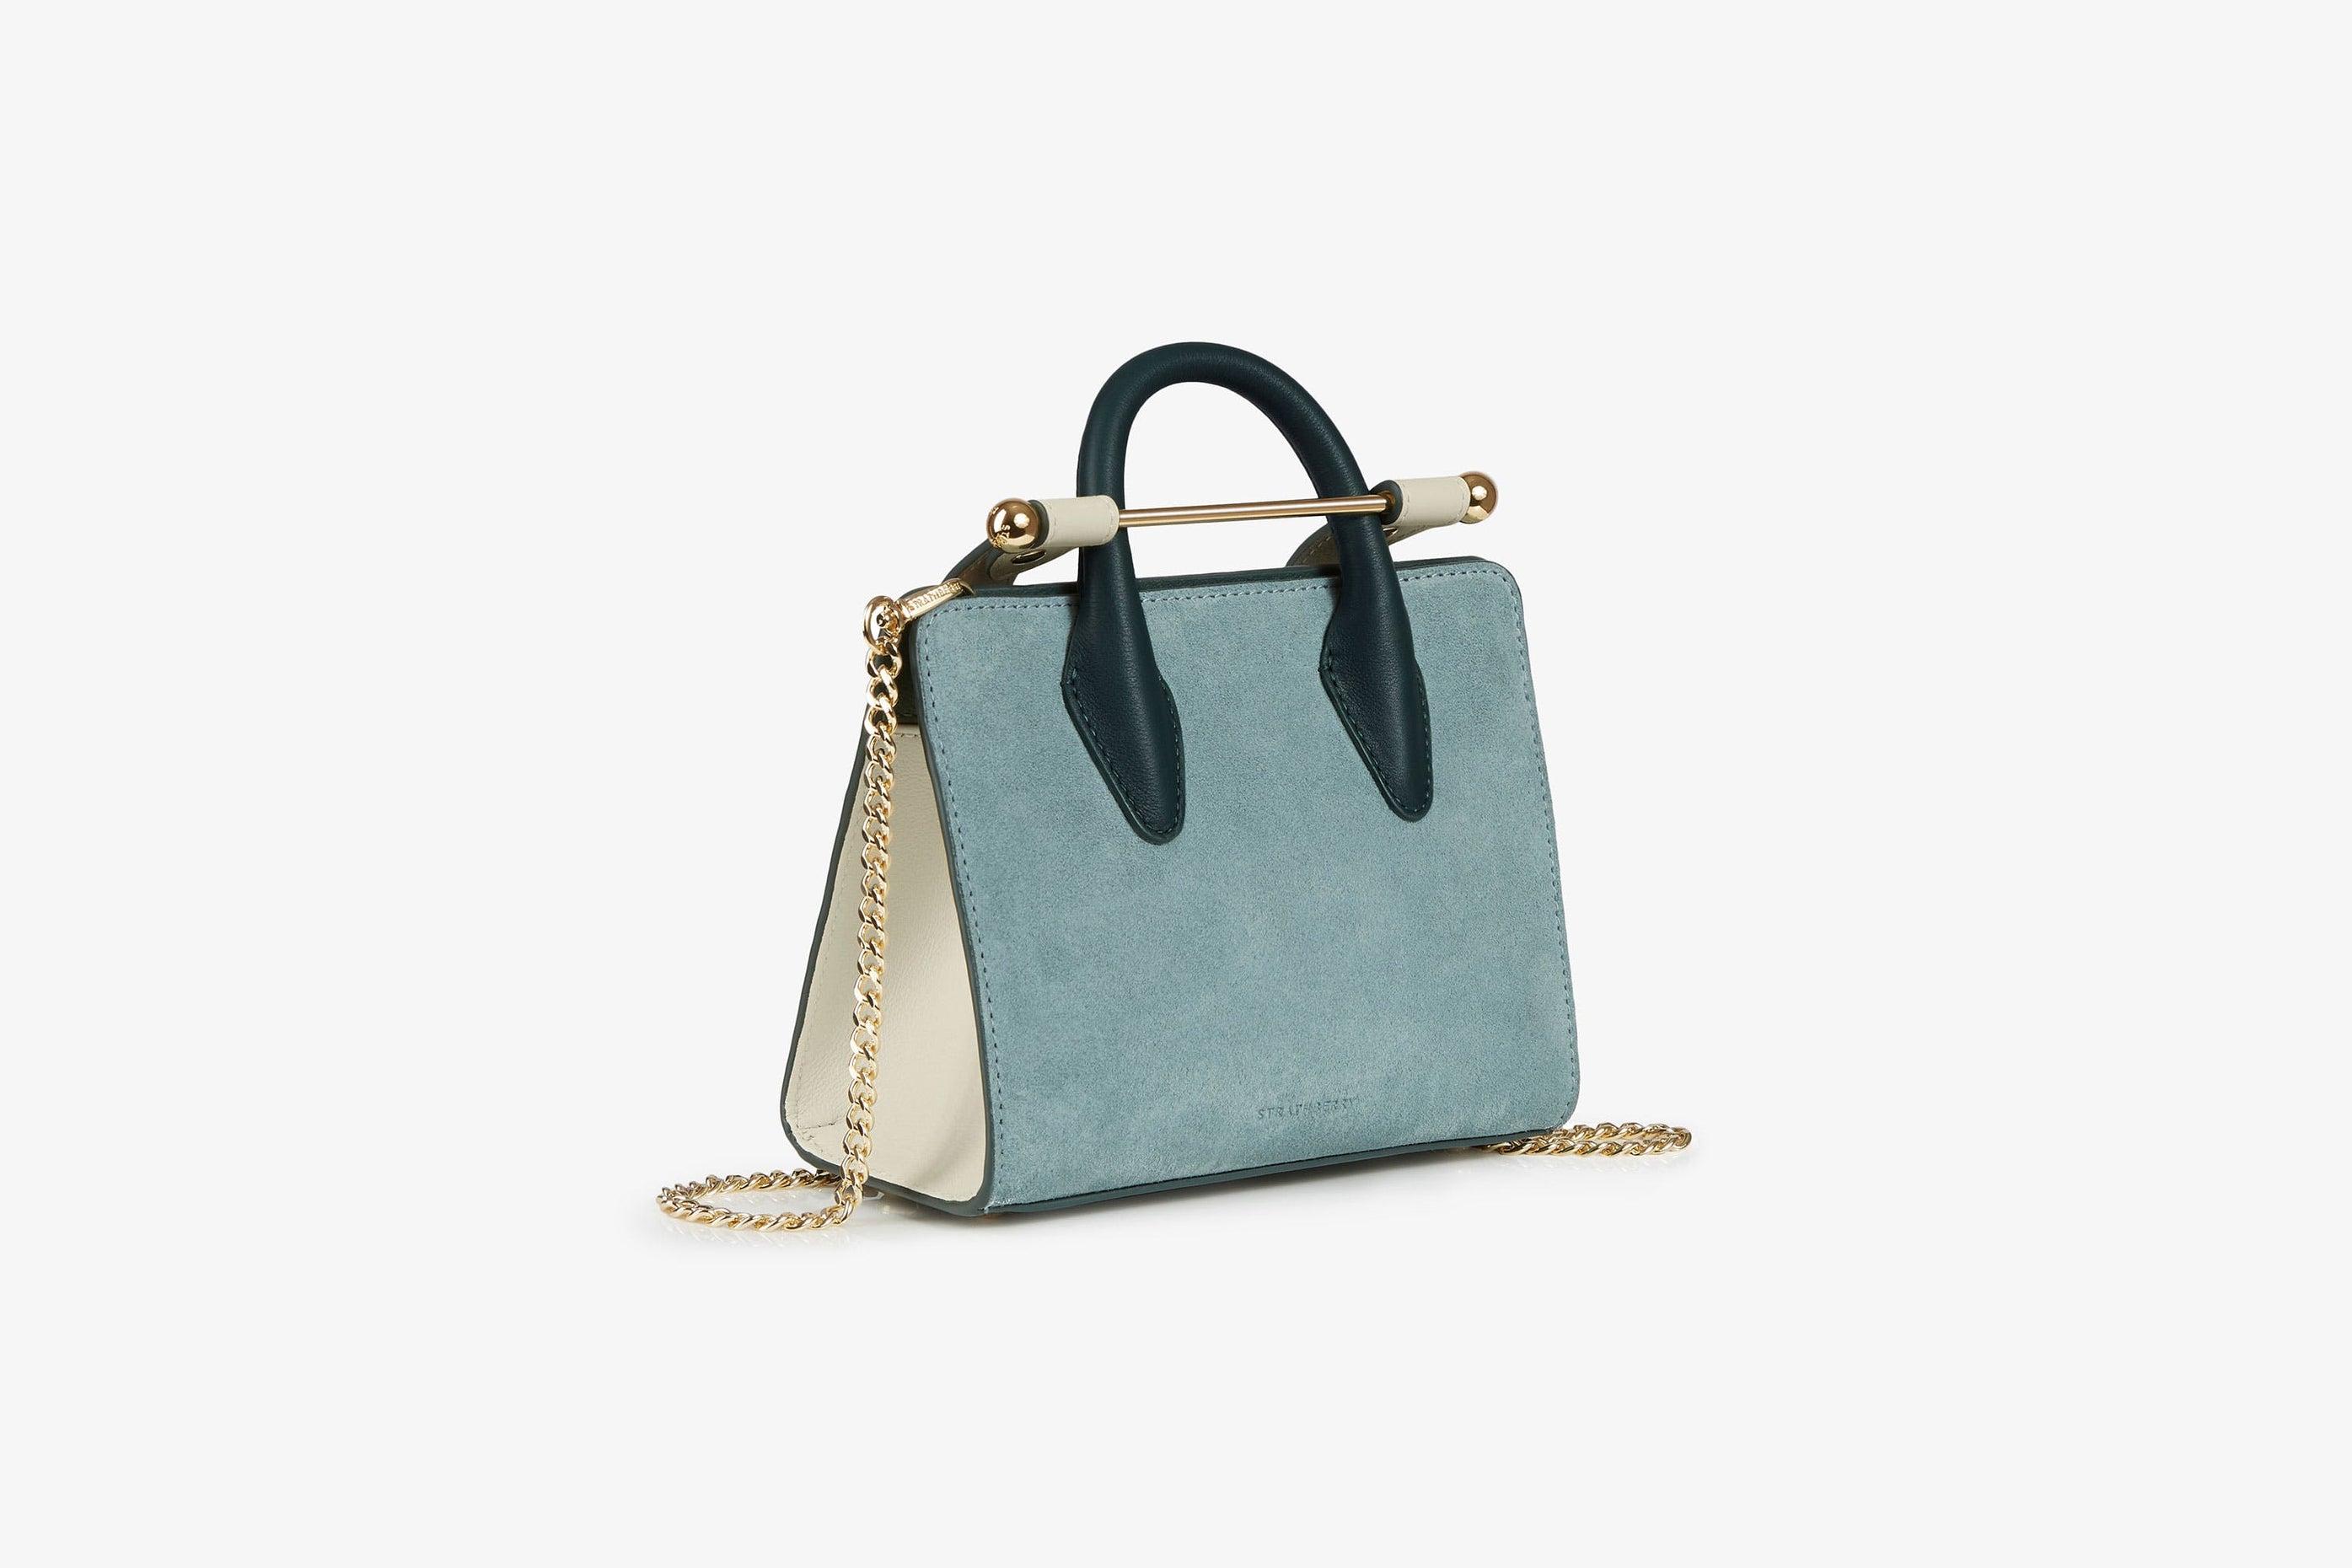 A view showcasing our The Strathberry Nano Tote - Leather/Suede Duck Egg Blue/Bottle Green/Diamond